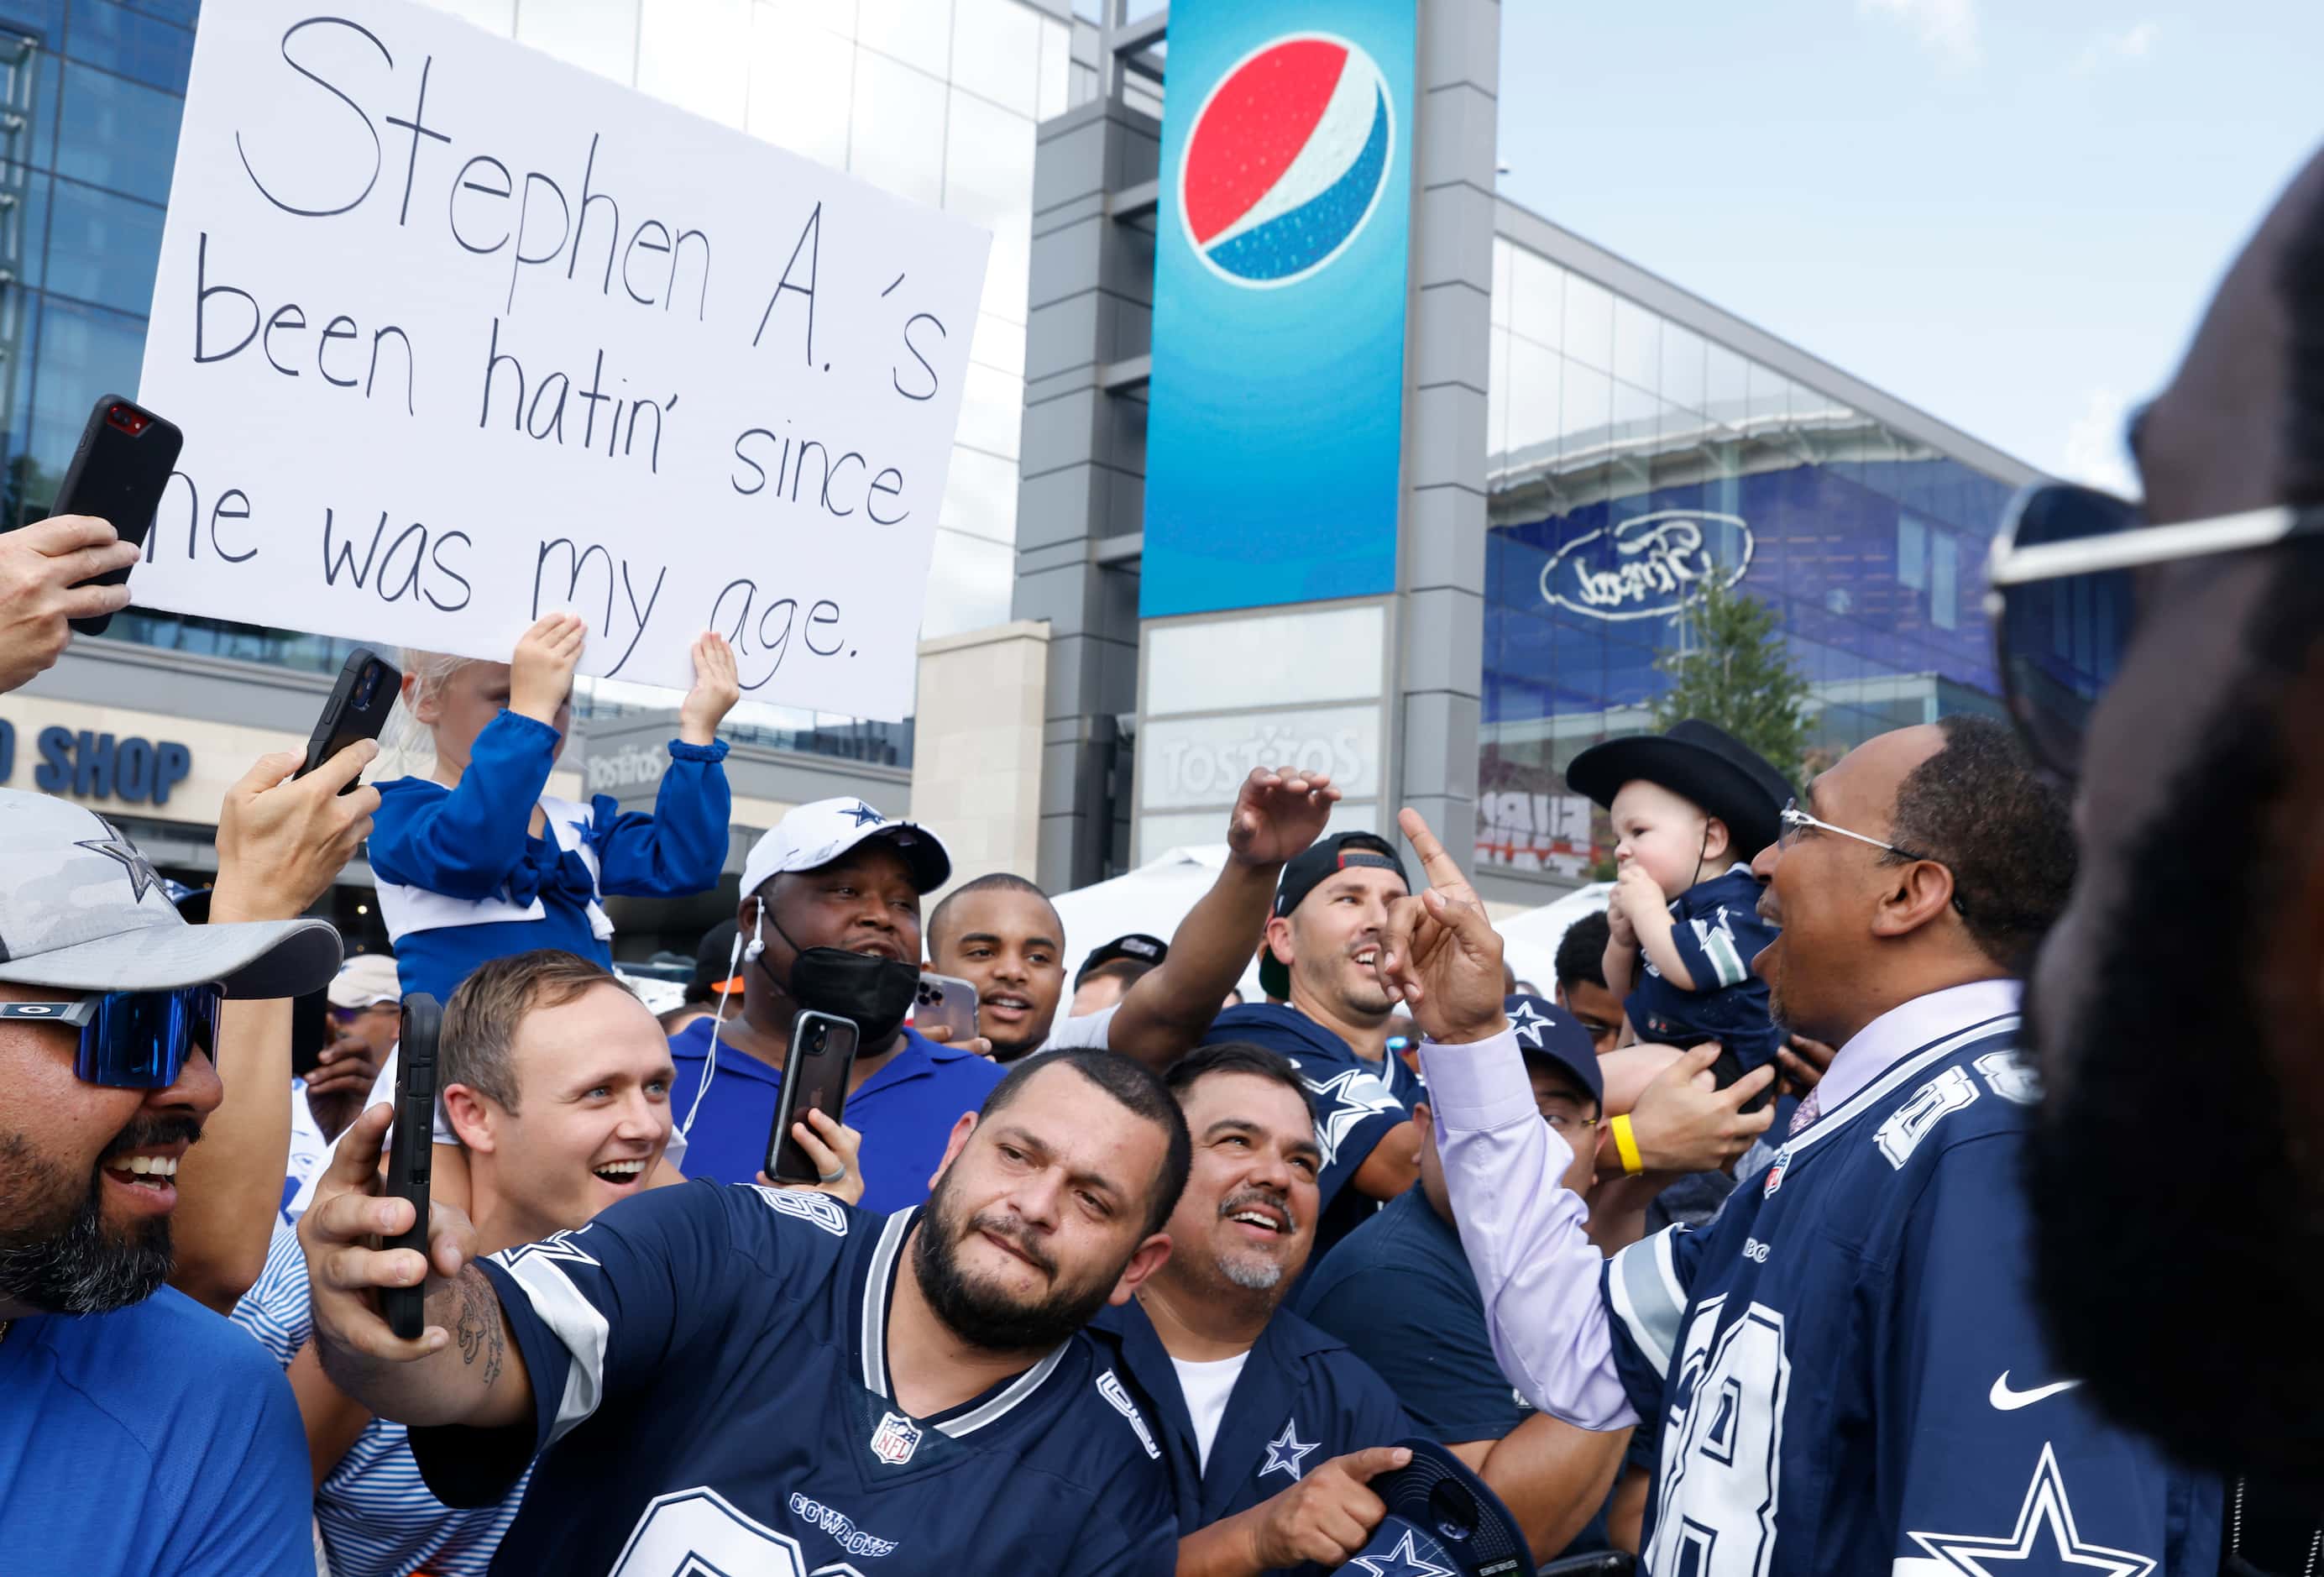 Host Stephen A. Smith also known as a "Cowboys Hater,” right, reacts towards a sign held by...